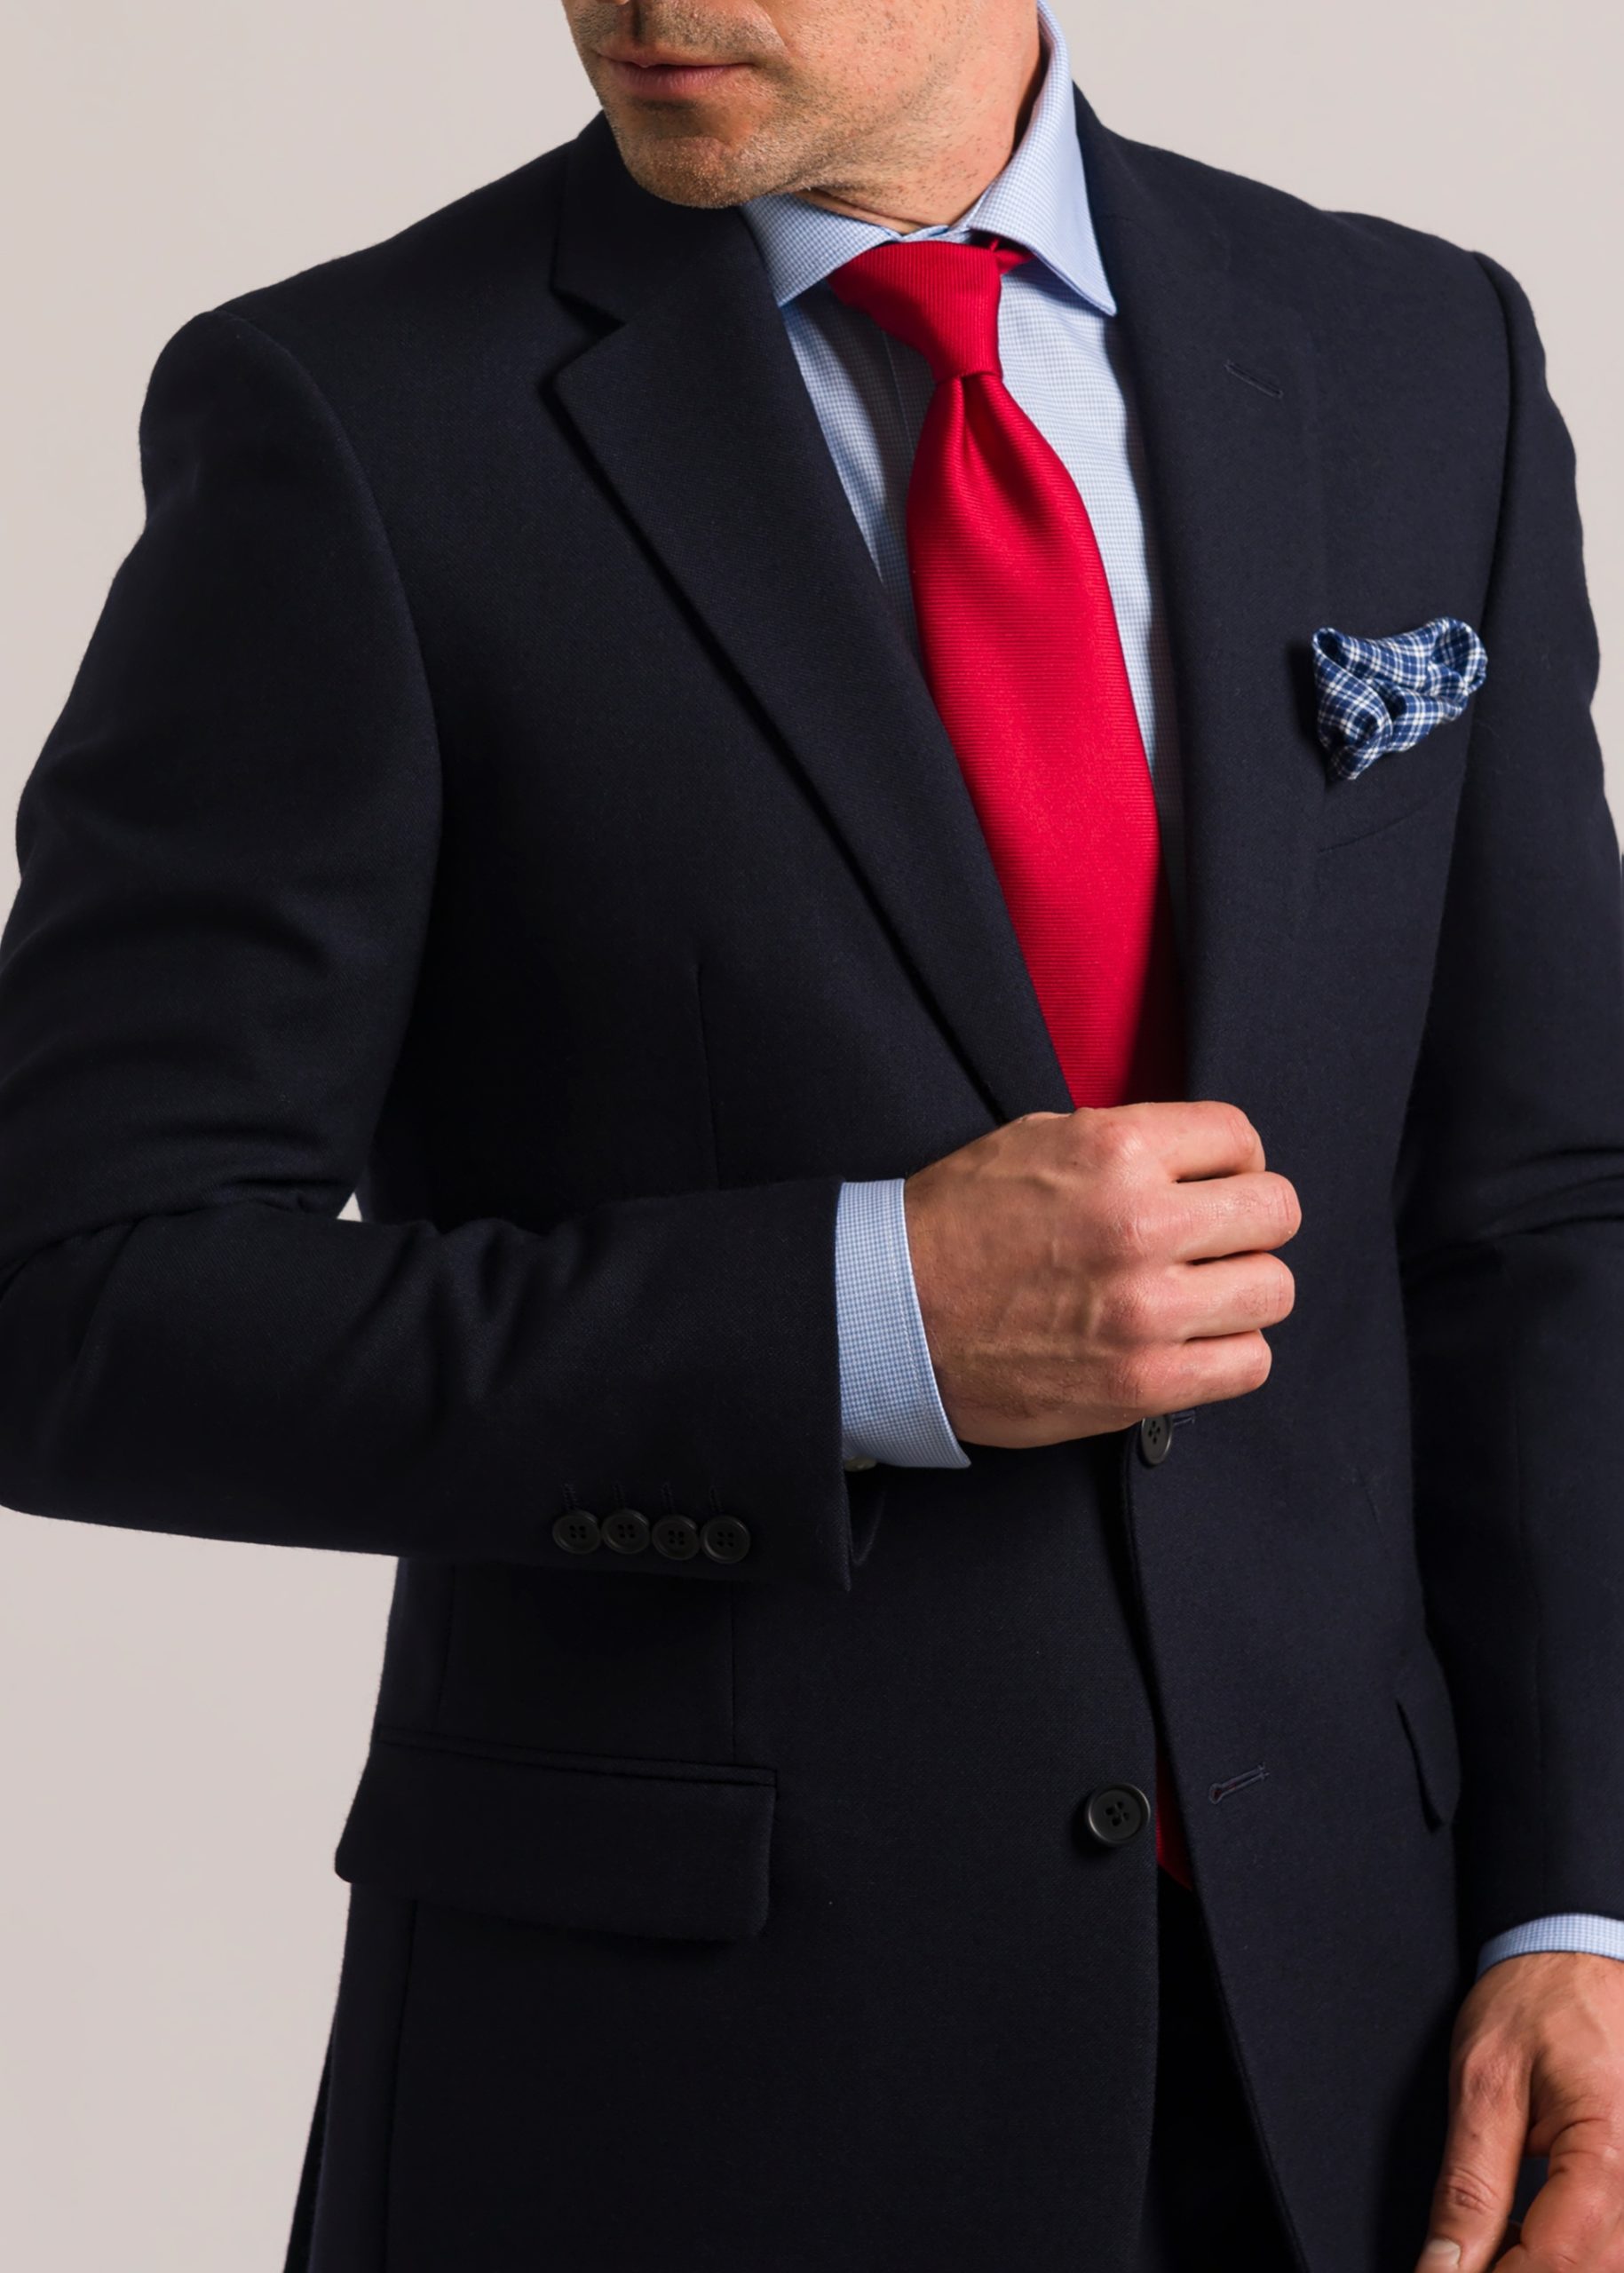 Men’s tailored fit hopsack navy suit styled with red tie